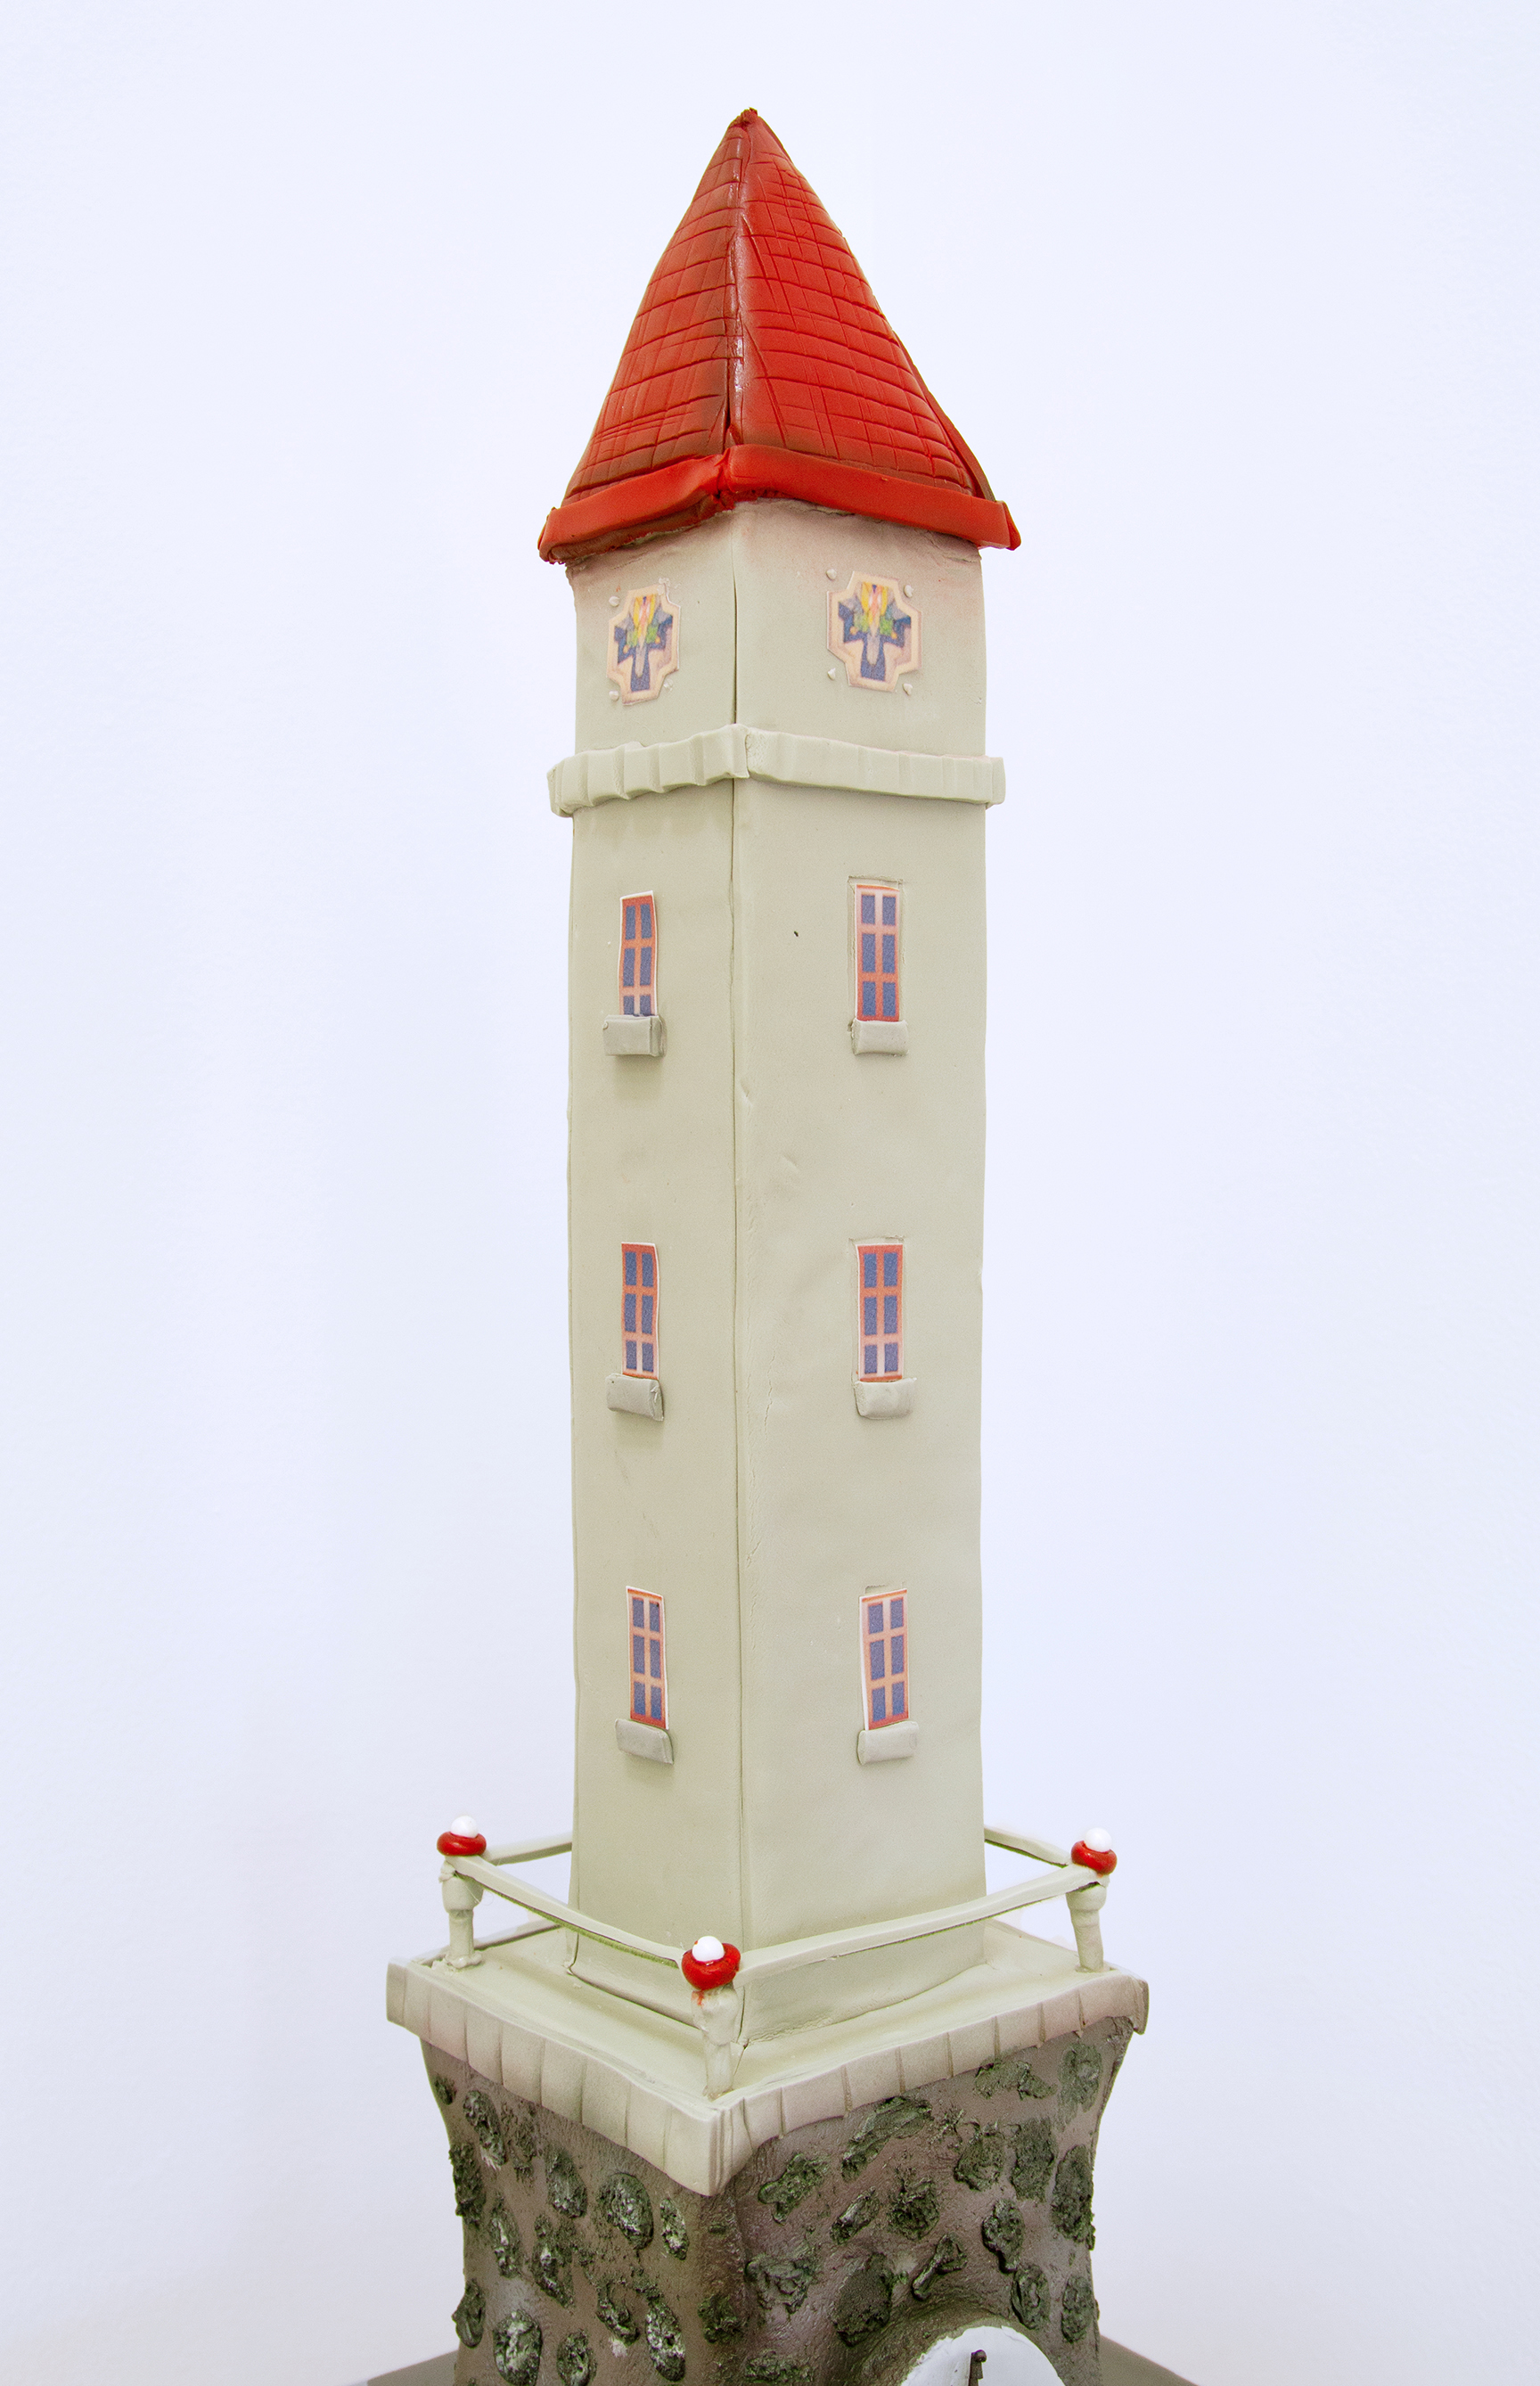 Detail of a tower shaped cake on a wooden pedestal